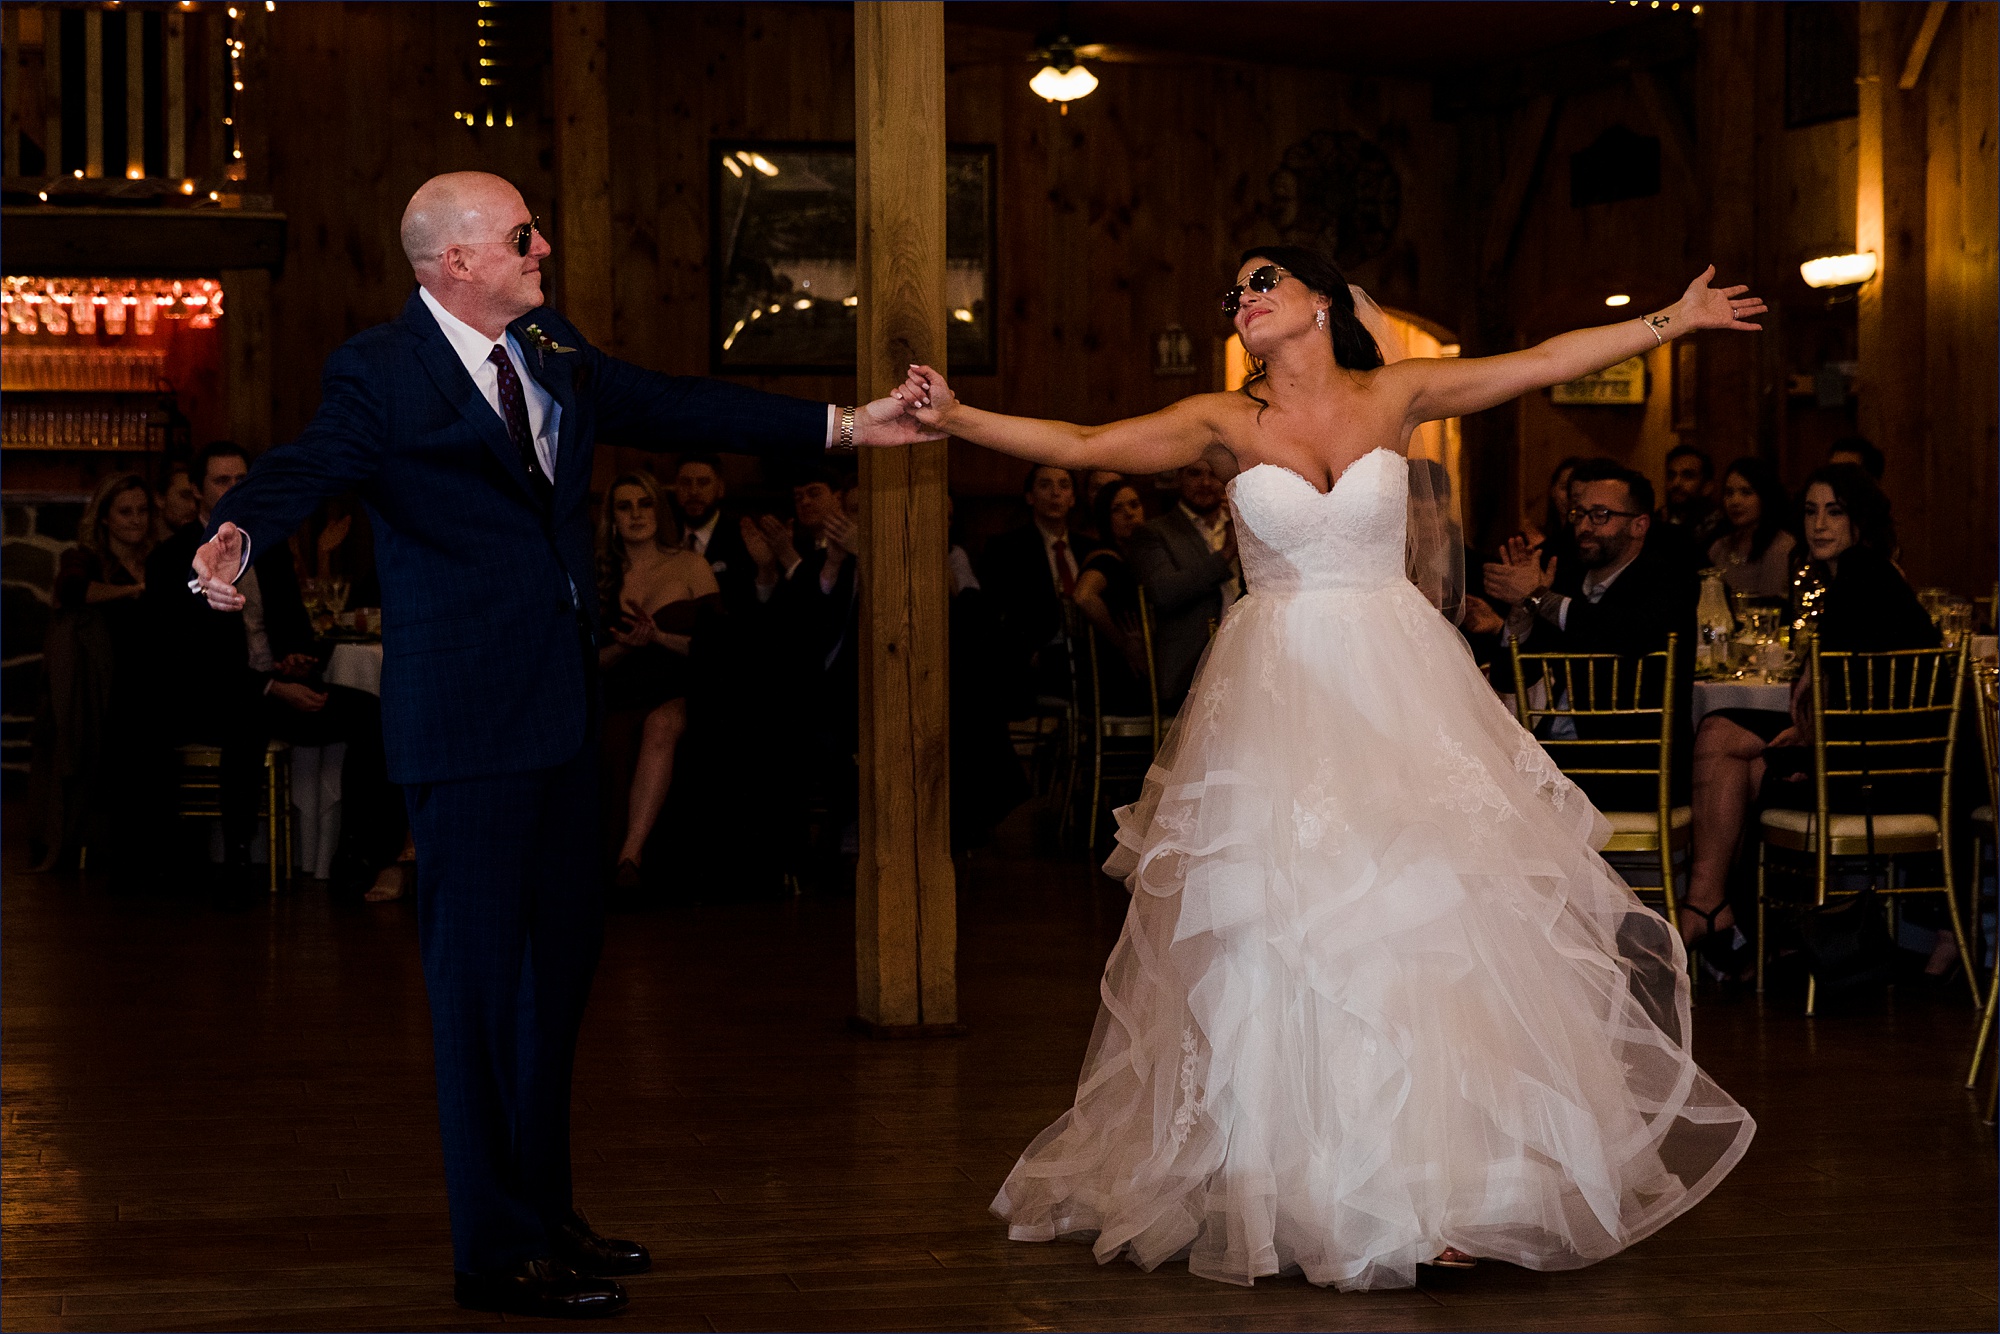 The bride and her father dance together at the wedding reception